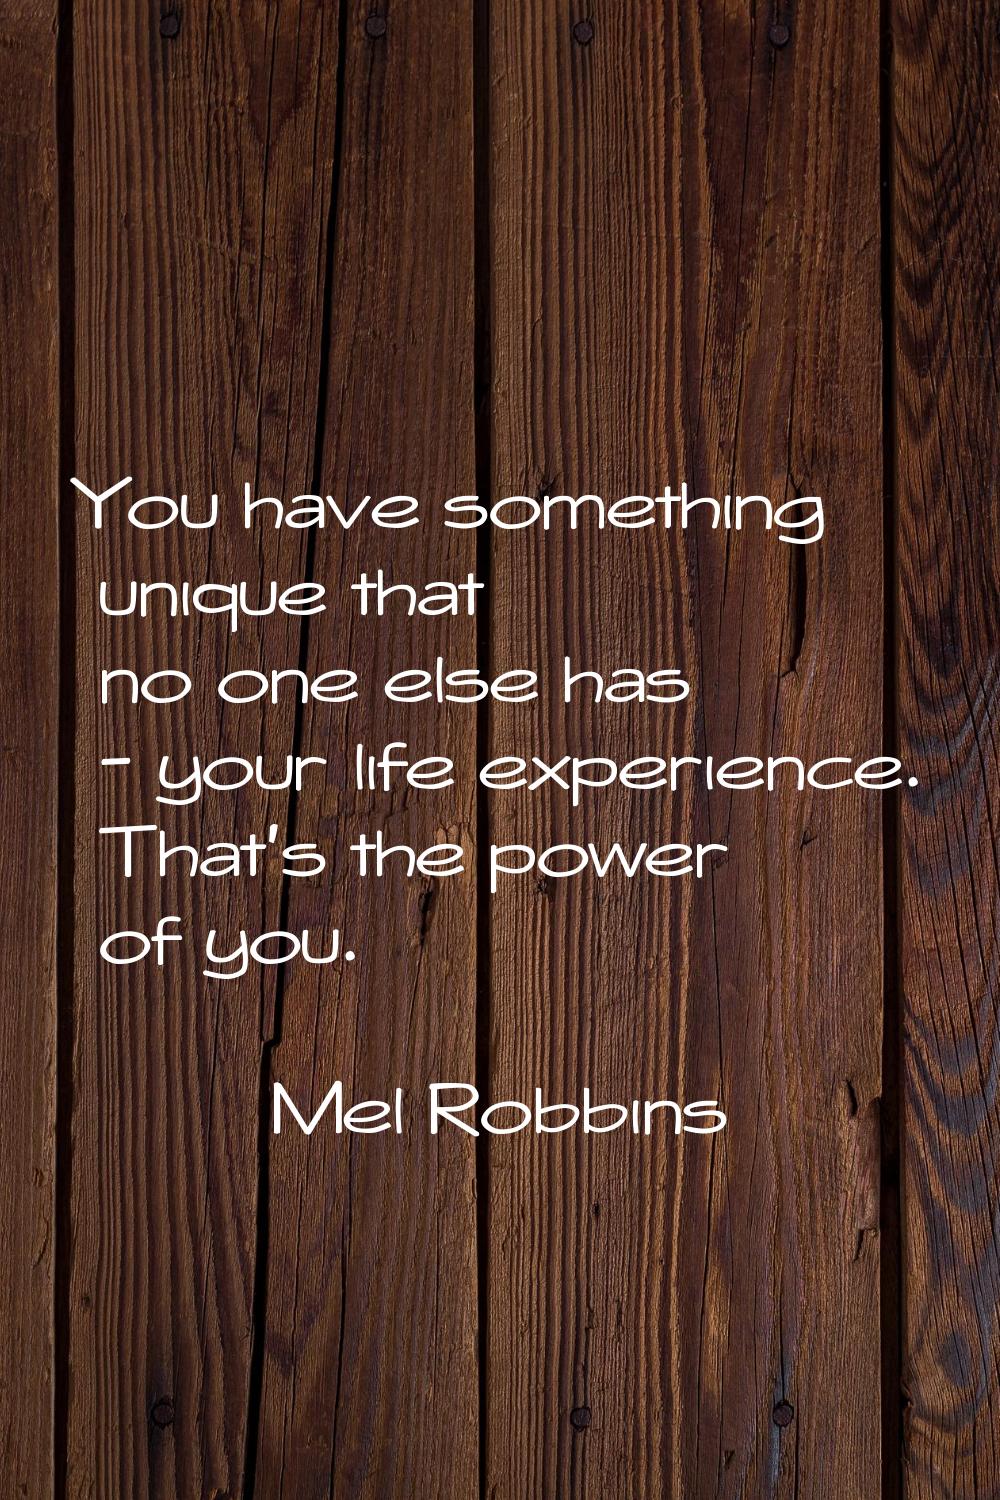 You have something unique that no one else has - your life experience. That's the power of you.